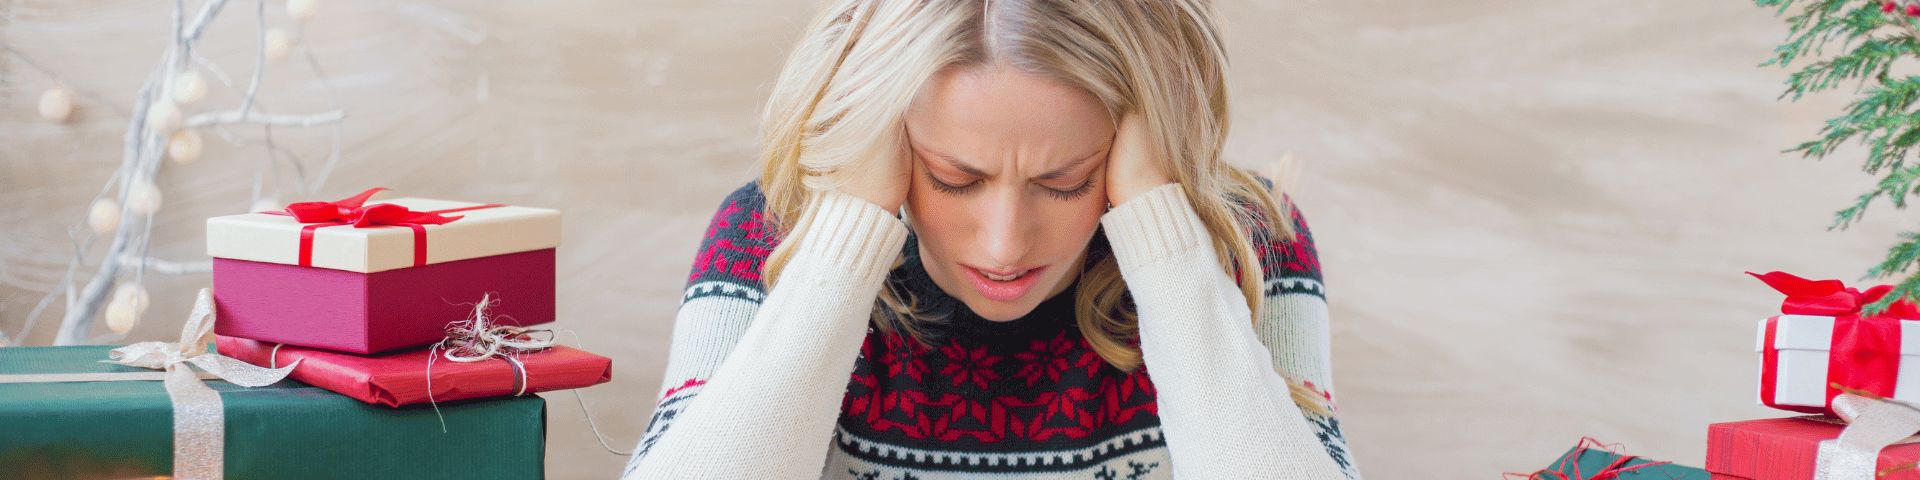 Wellness@Work : How to find hope amid holiday stress 